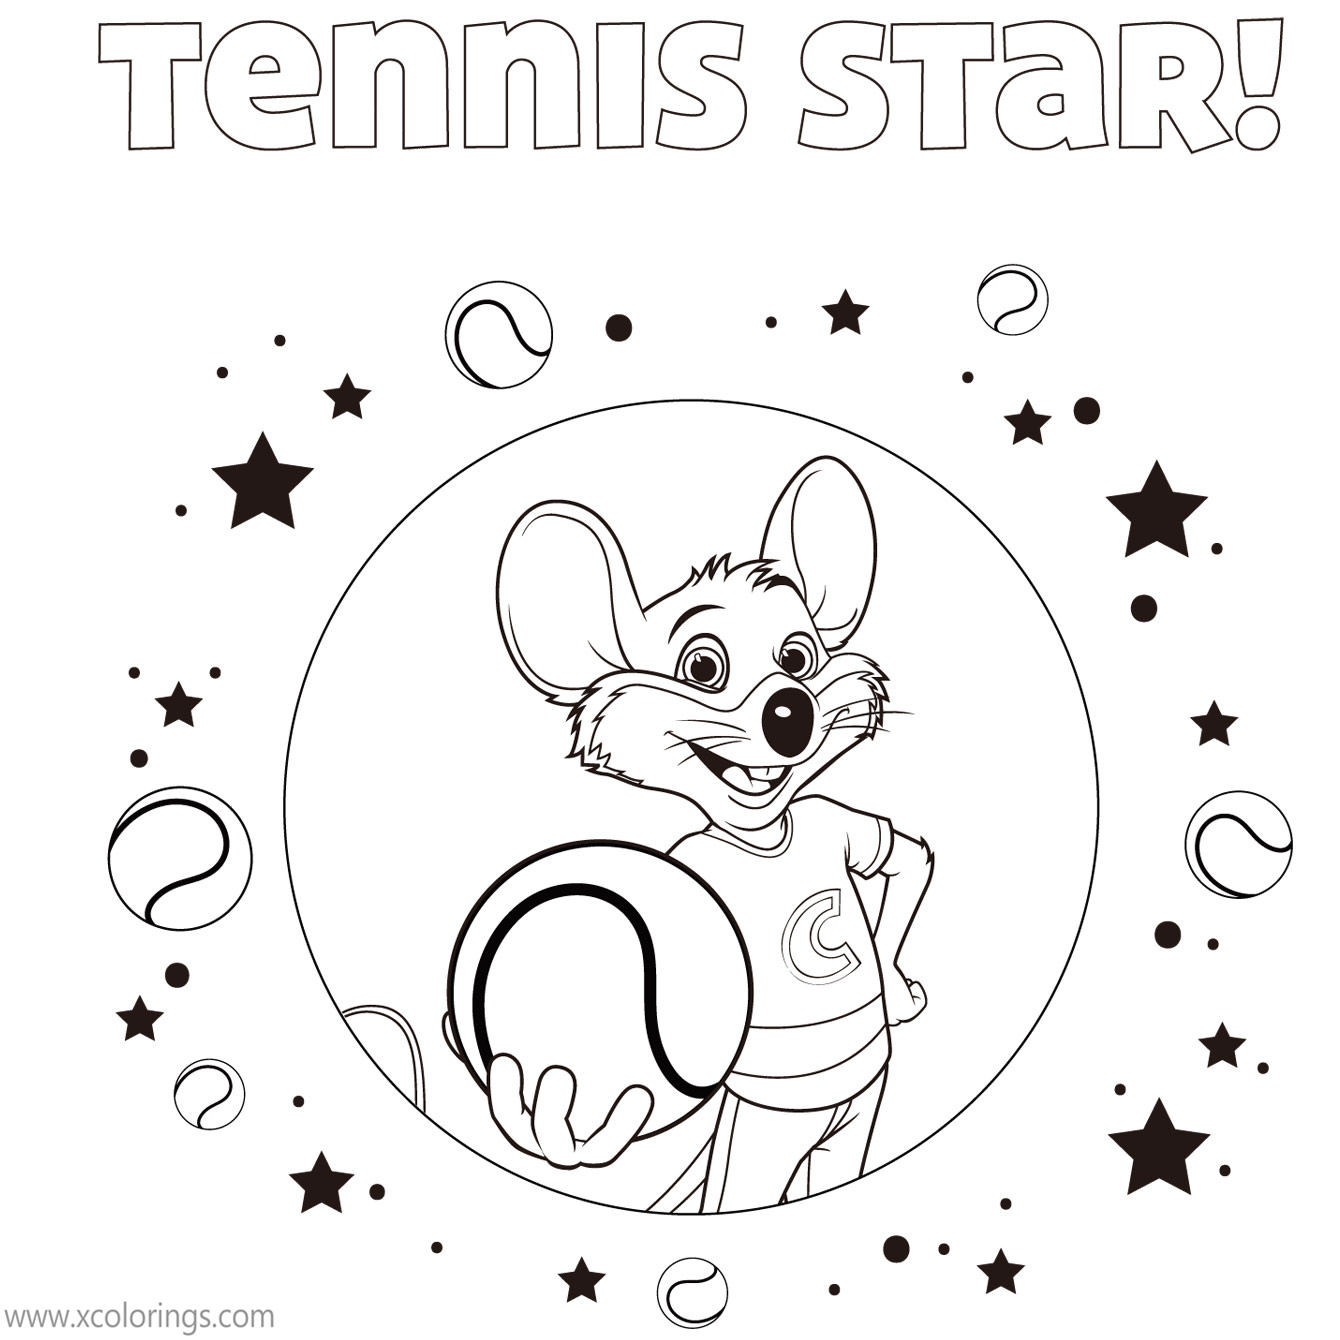 Free Chuck E Cheese Coloring Pages Tennis Star printable